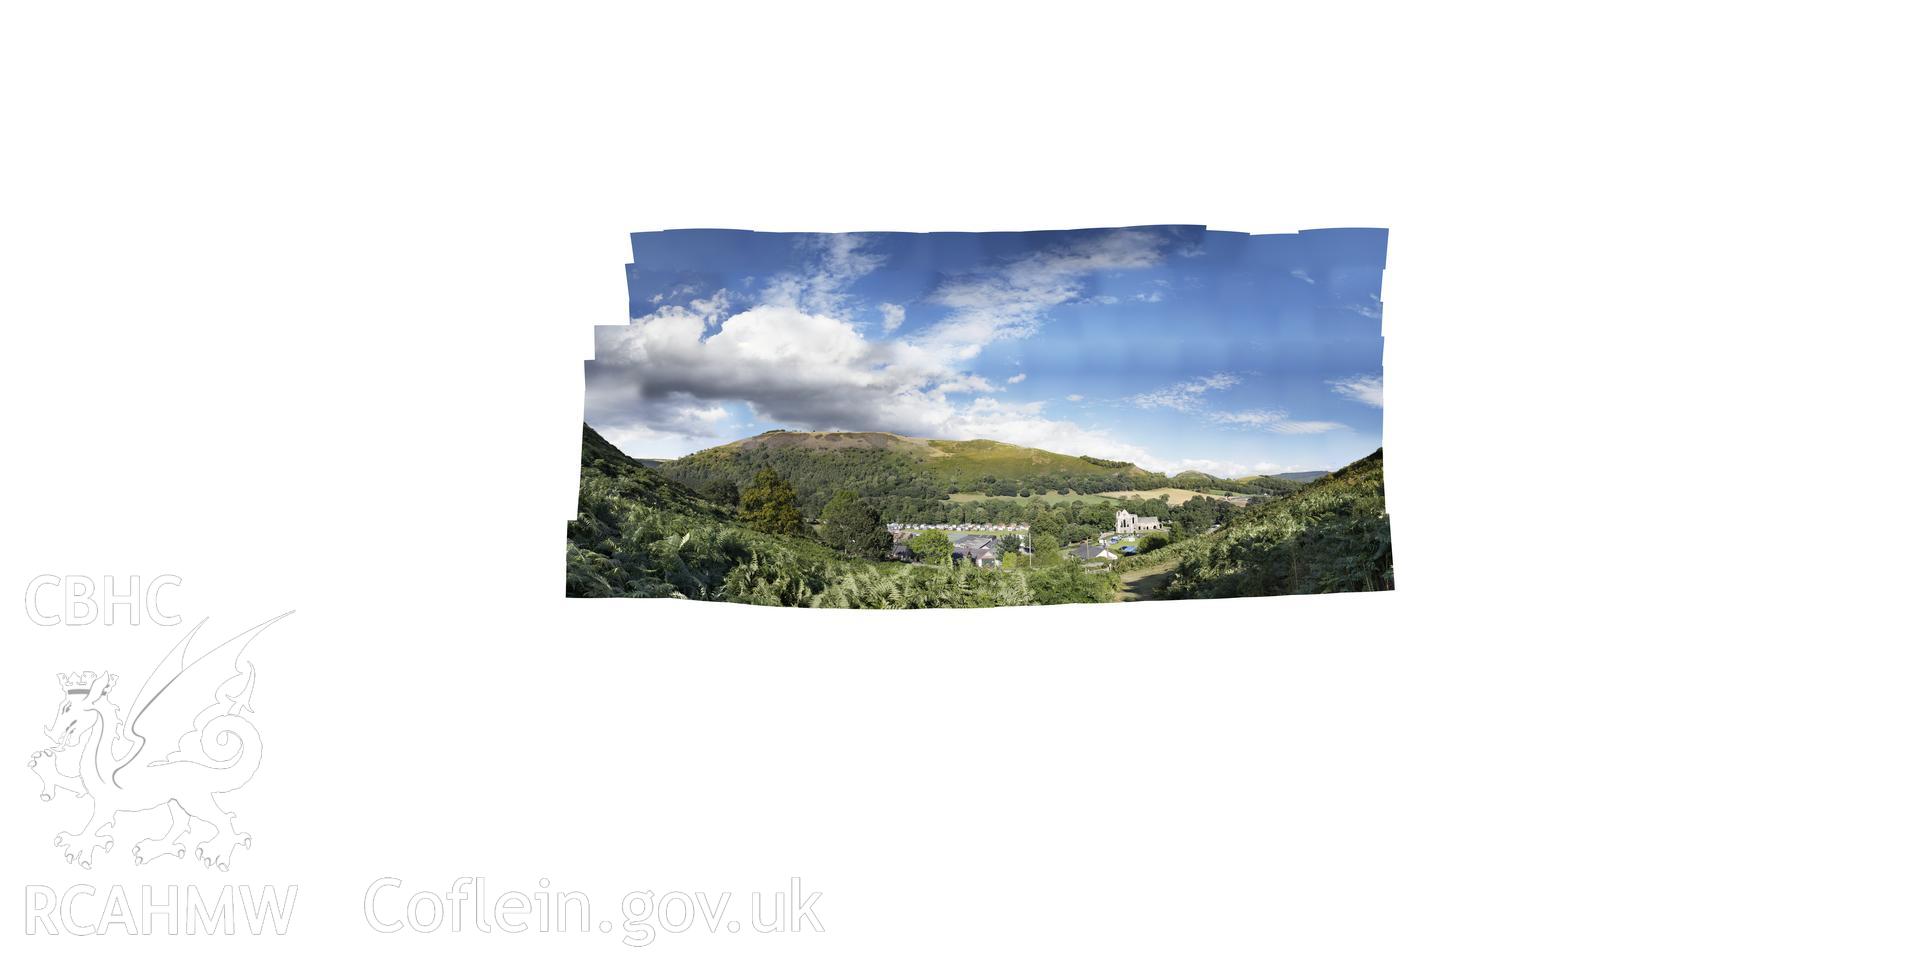 Reduced resolution .tiff file of stitched images overlooking Valle Crucis Abbey, carried out by Sue Fielding and Rita Singer, July 2017. Produced through European Travellers to Wales project.